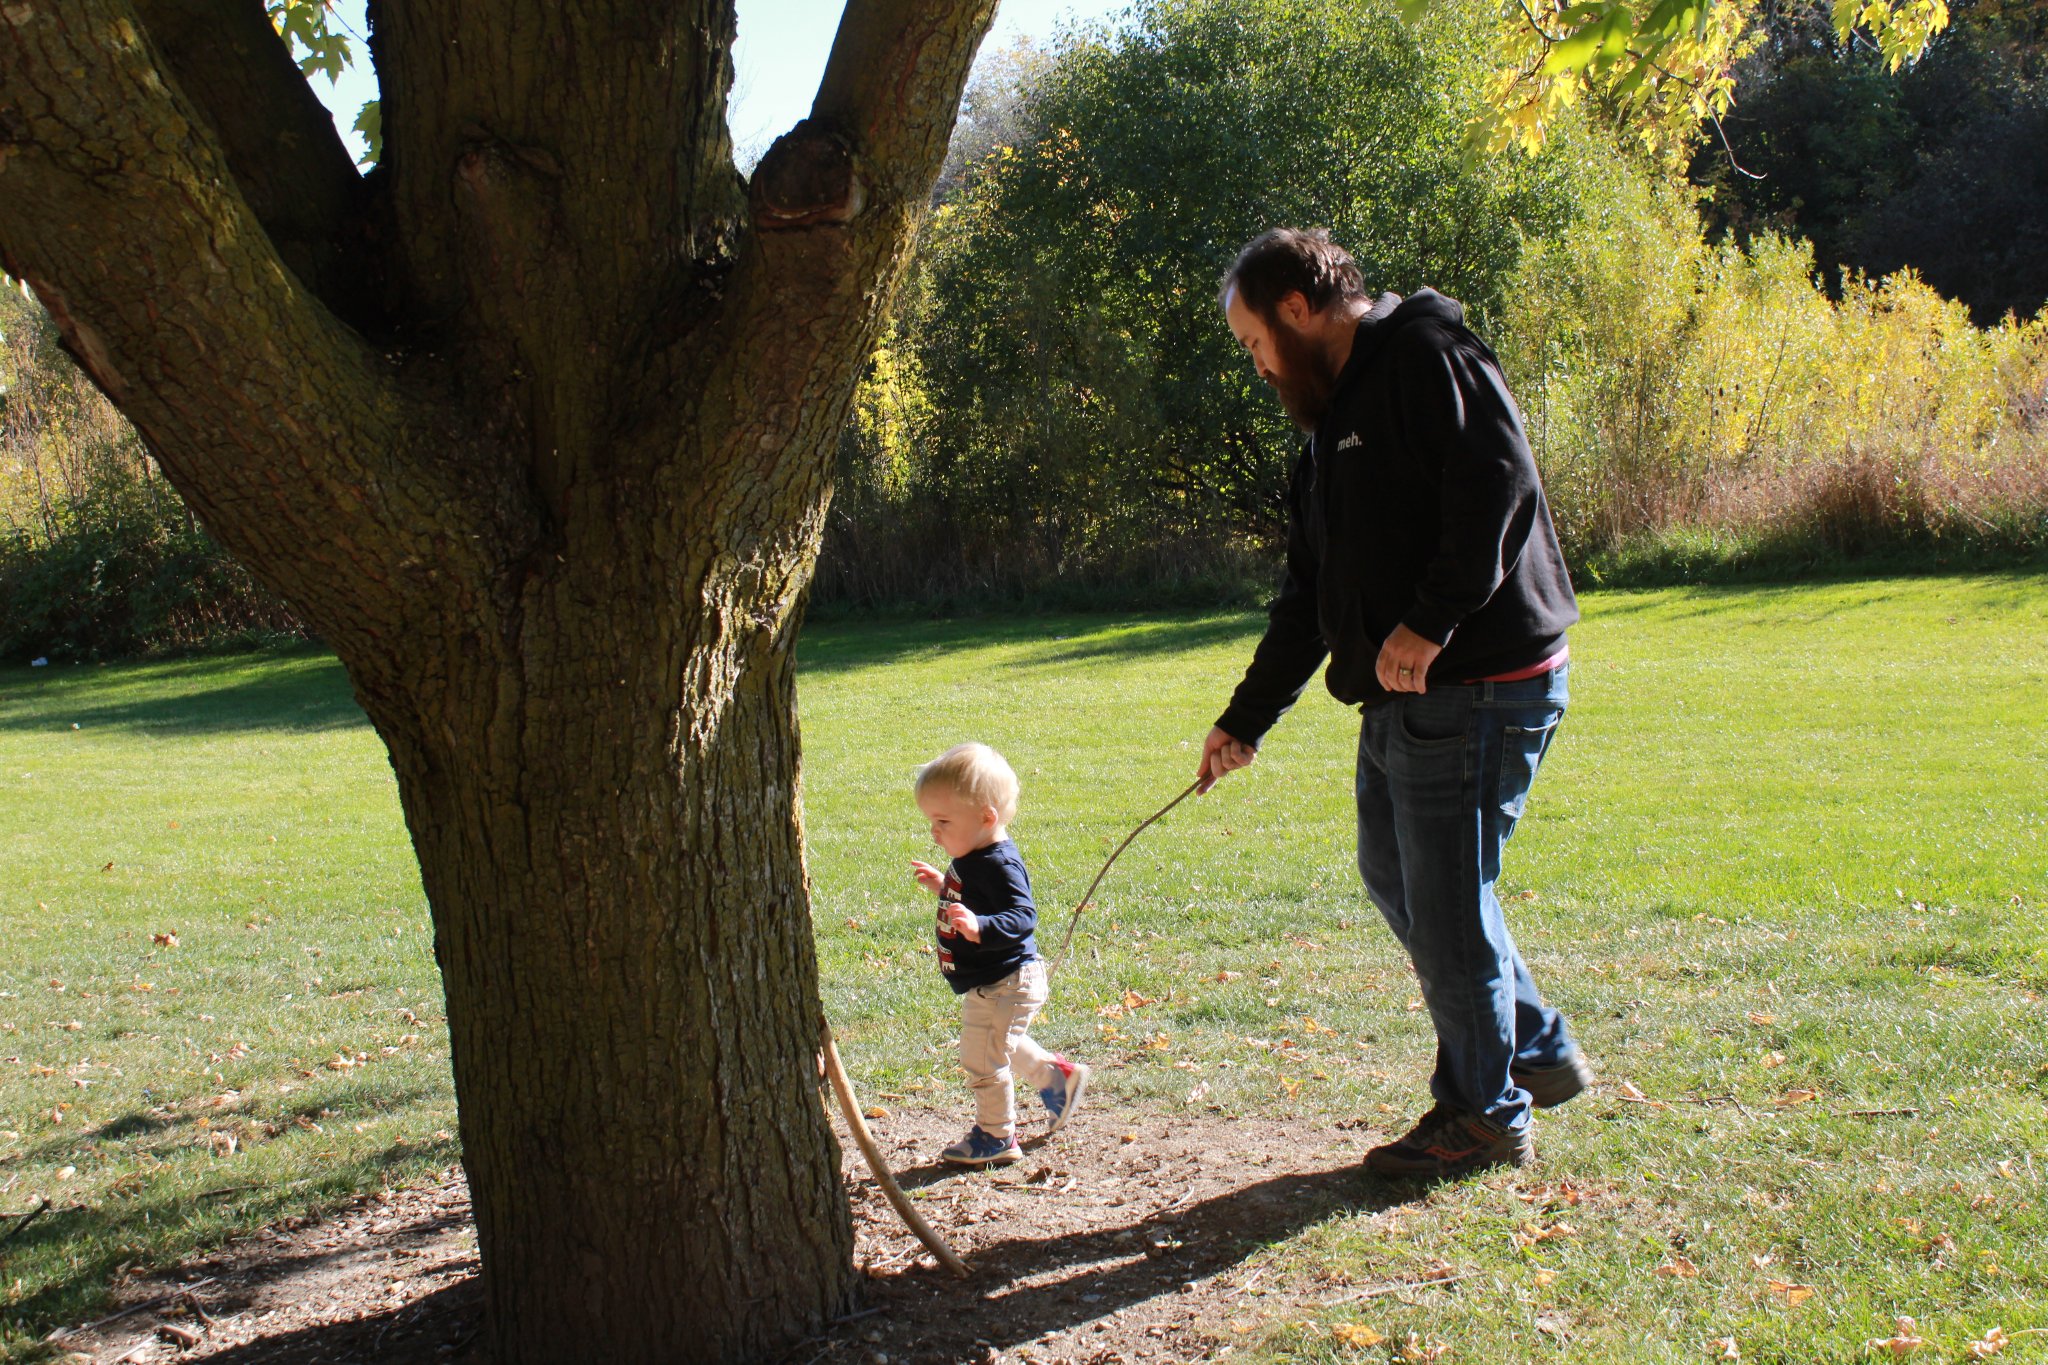 Here is my son, Asher, playing in the park with me